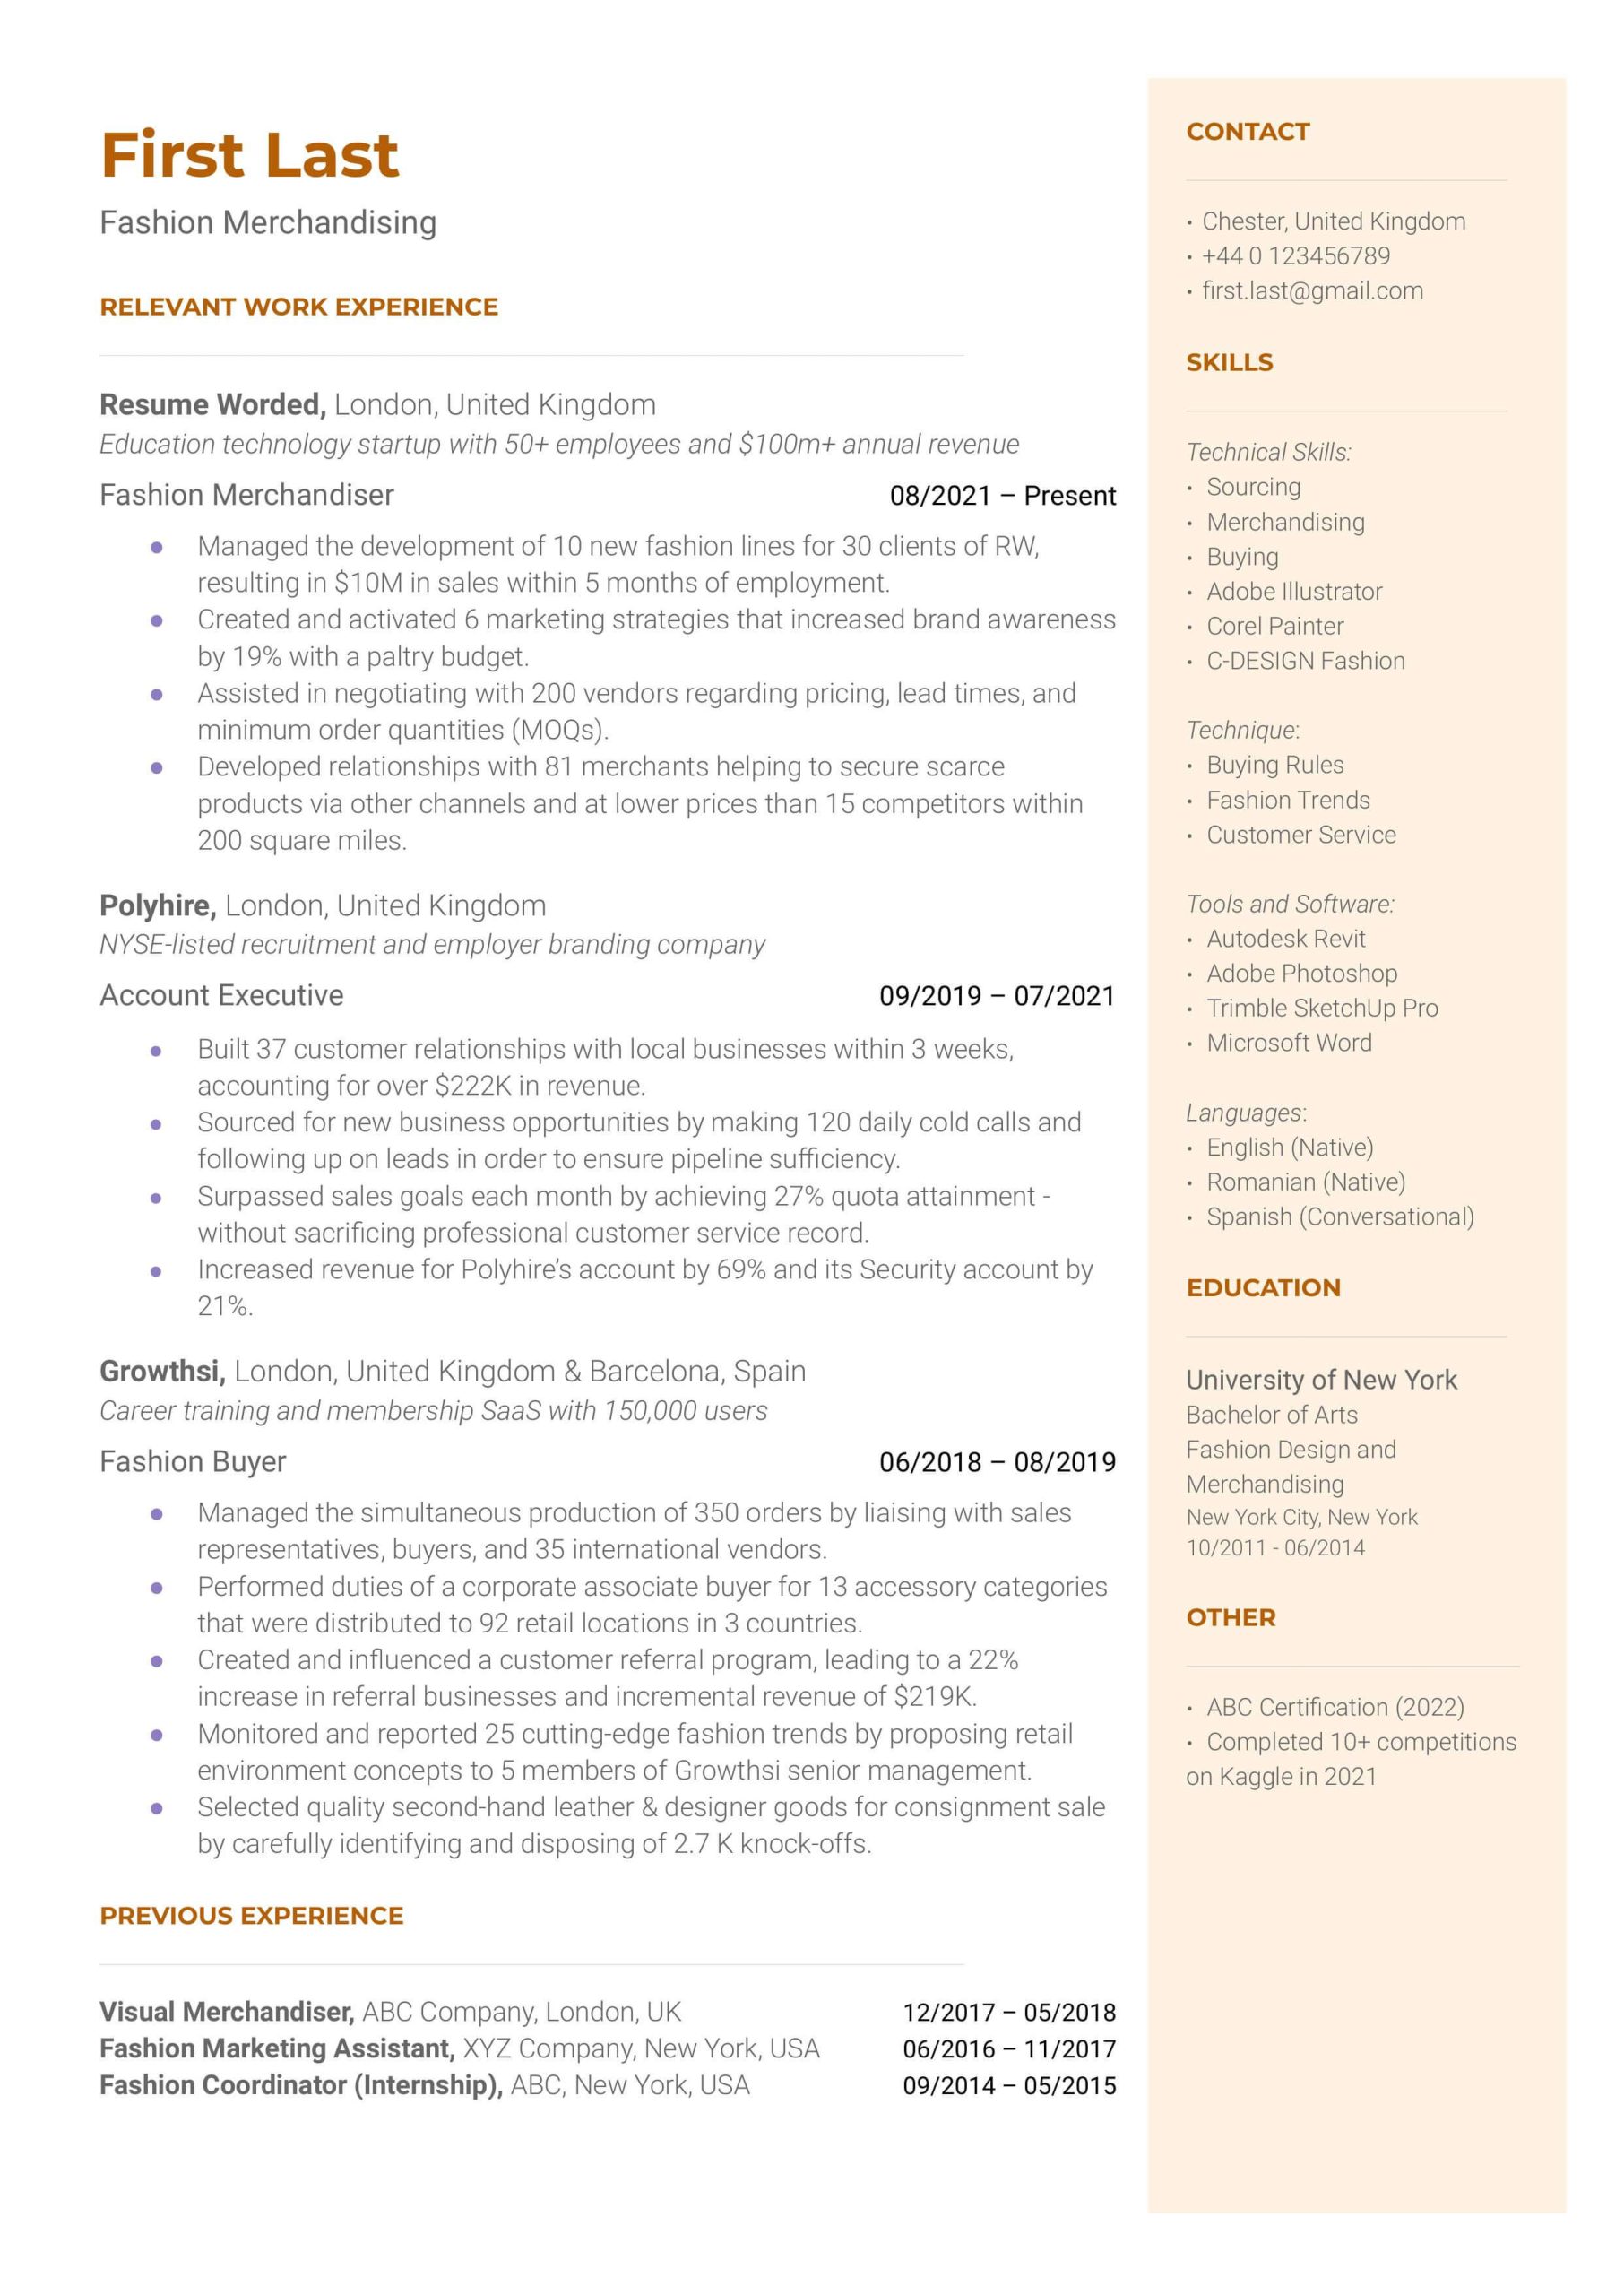 Sample Resume for A Visual Merchandising 3 Merchandising Resume Examples for 2022 Resume Worded